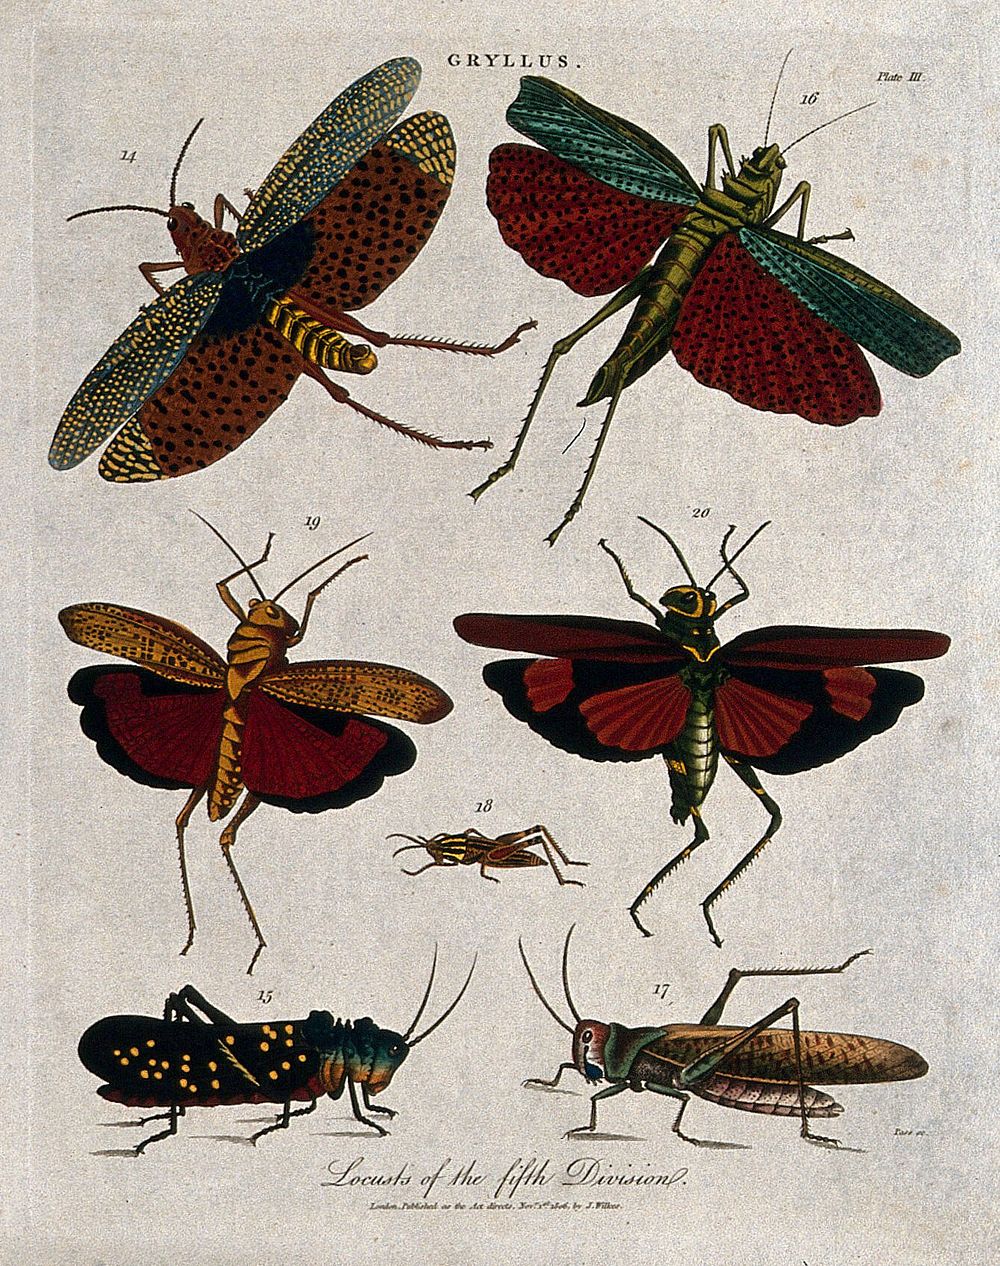 Species of locusts or crickets. Coloured etching by J. Pass, 1806.